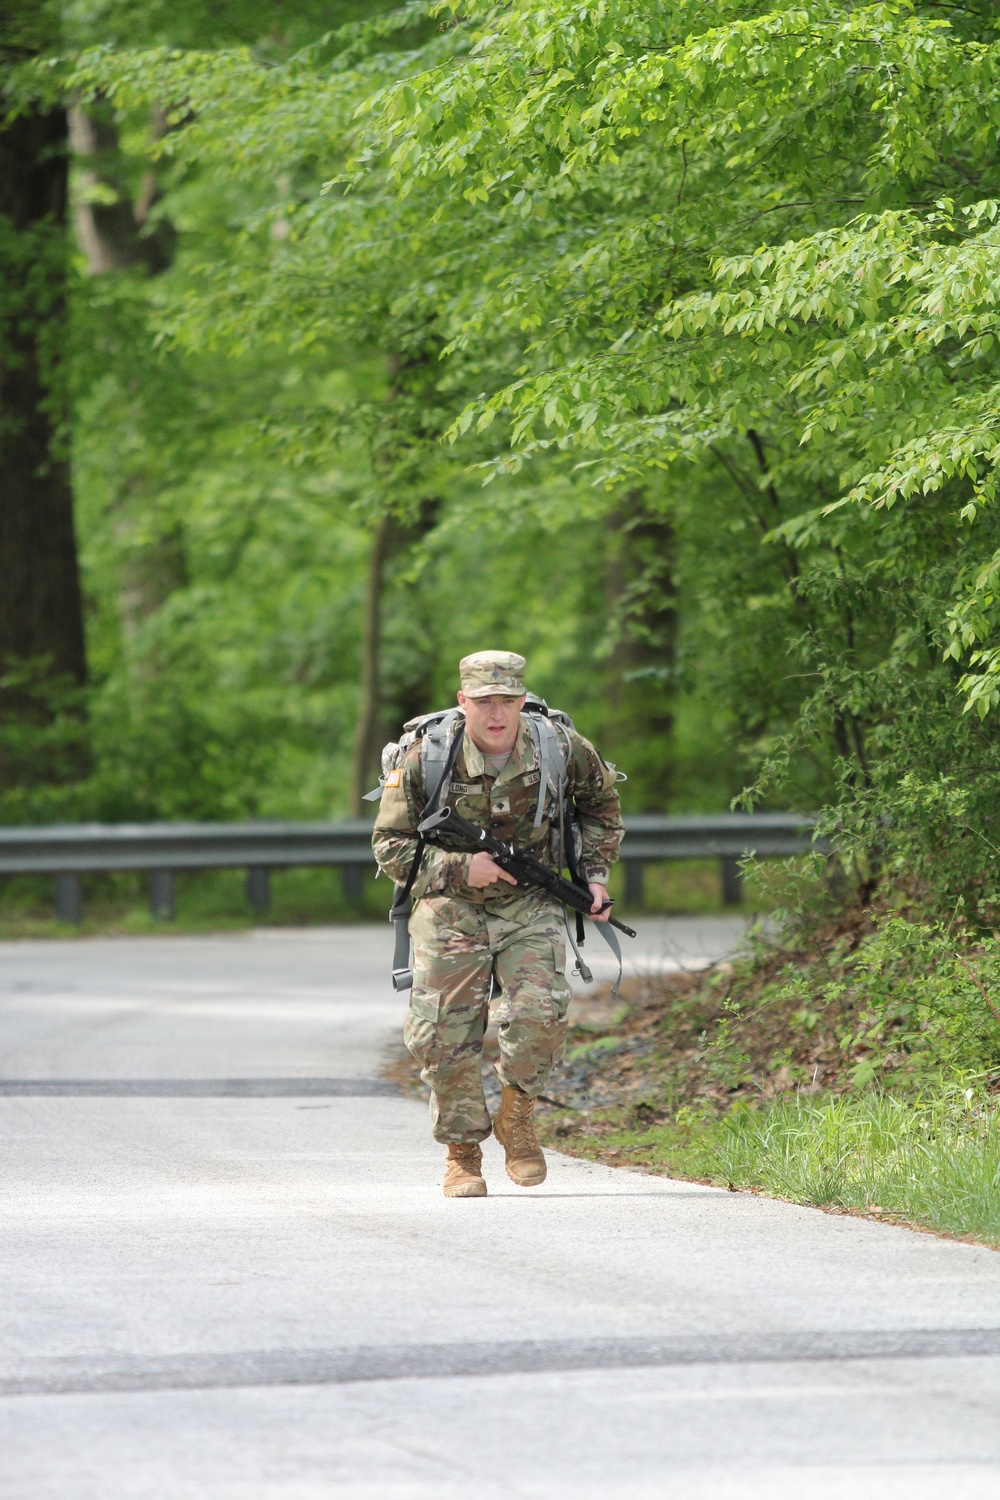 12-mile Ruck March with a Stress Shoot Exercise